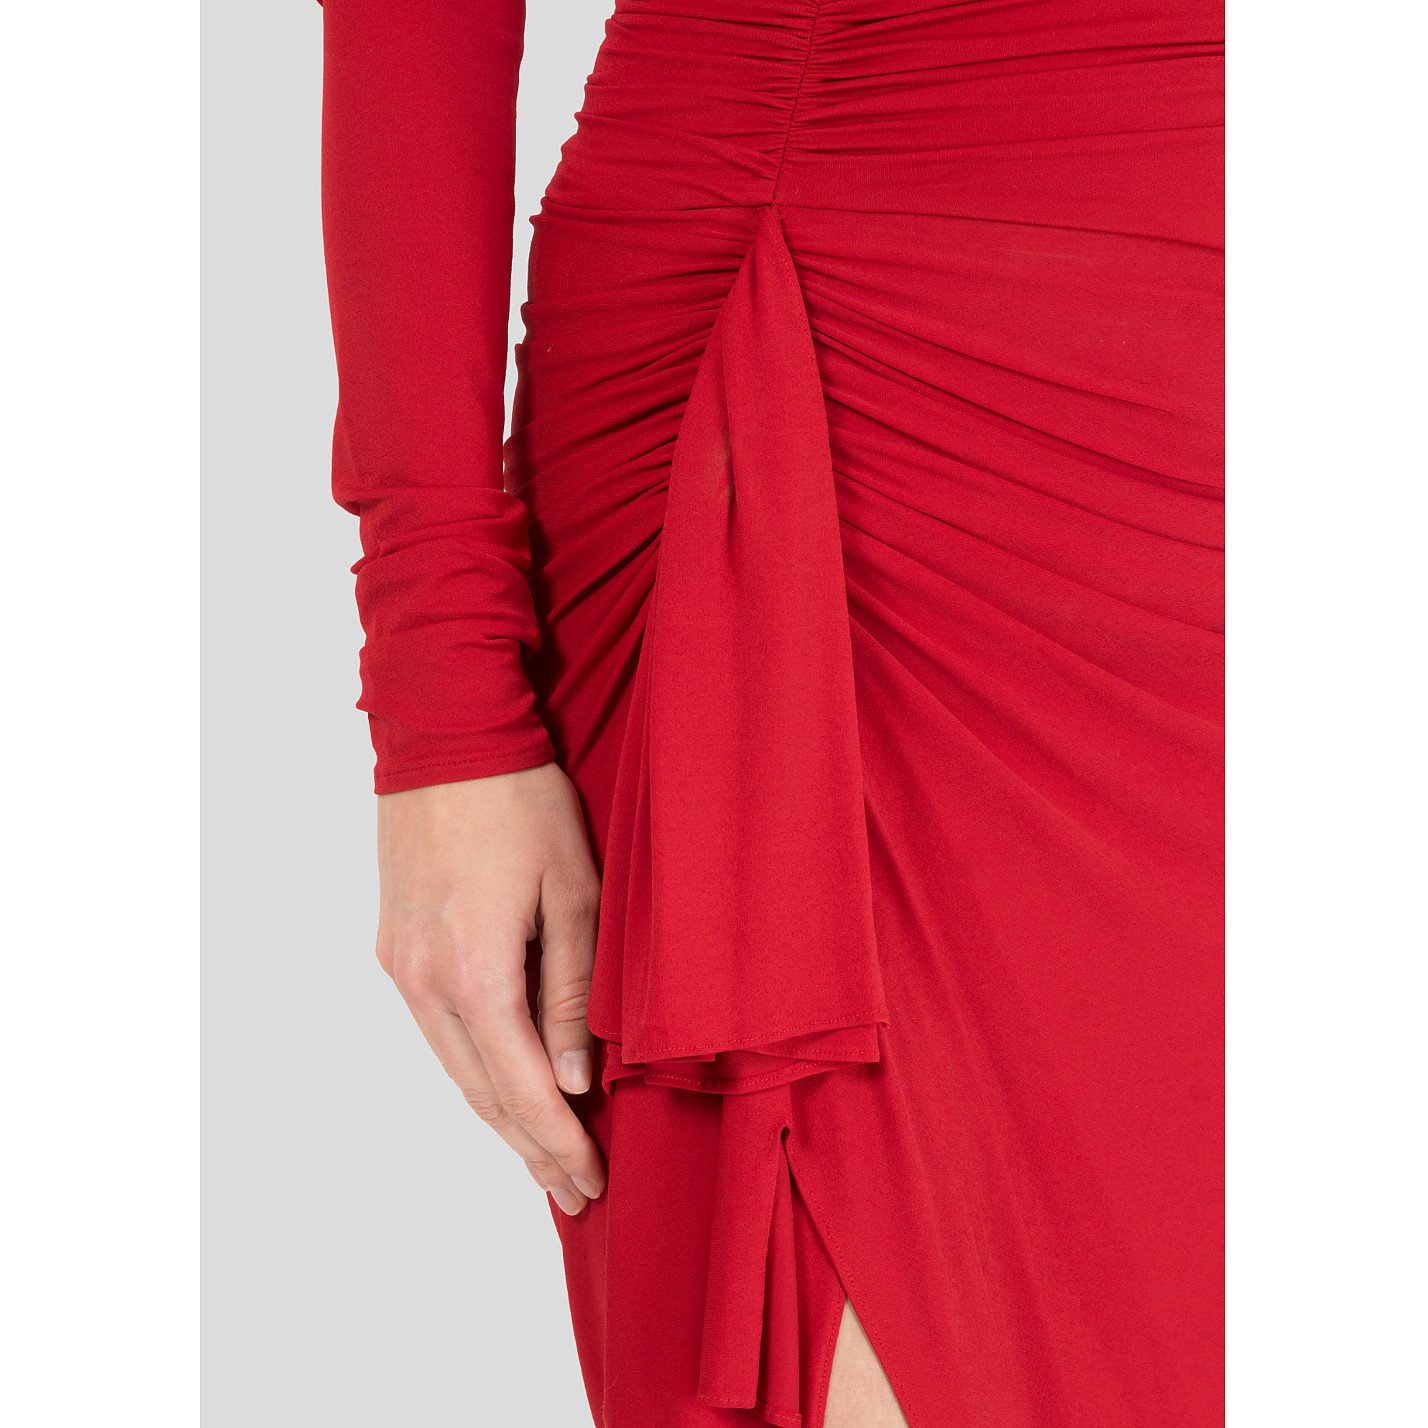 Alexandre Vauthier Ruched Stretch-Jersey Dress